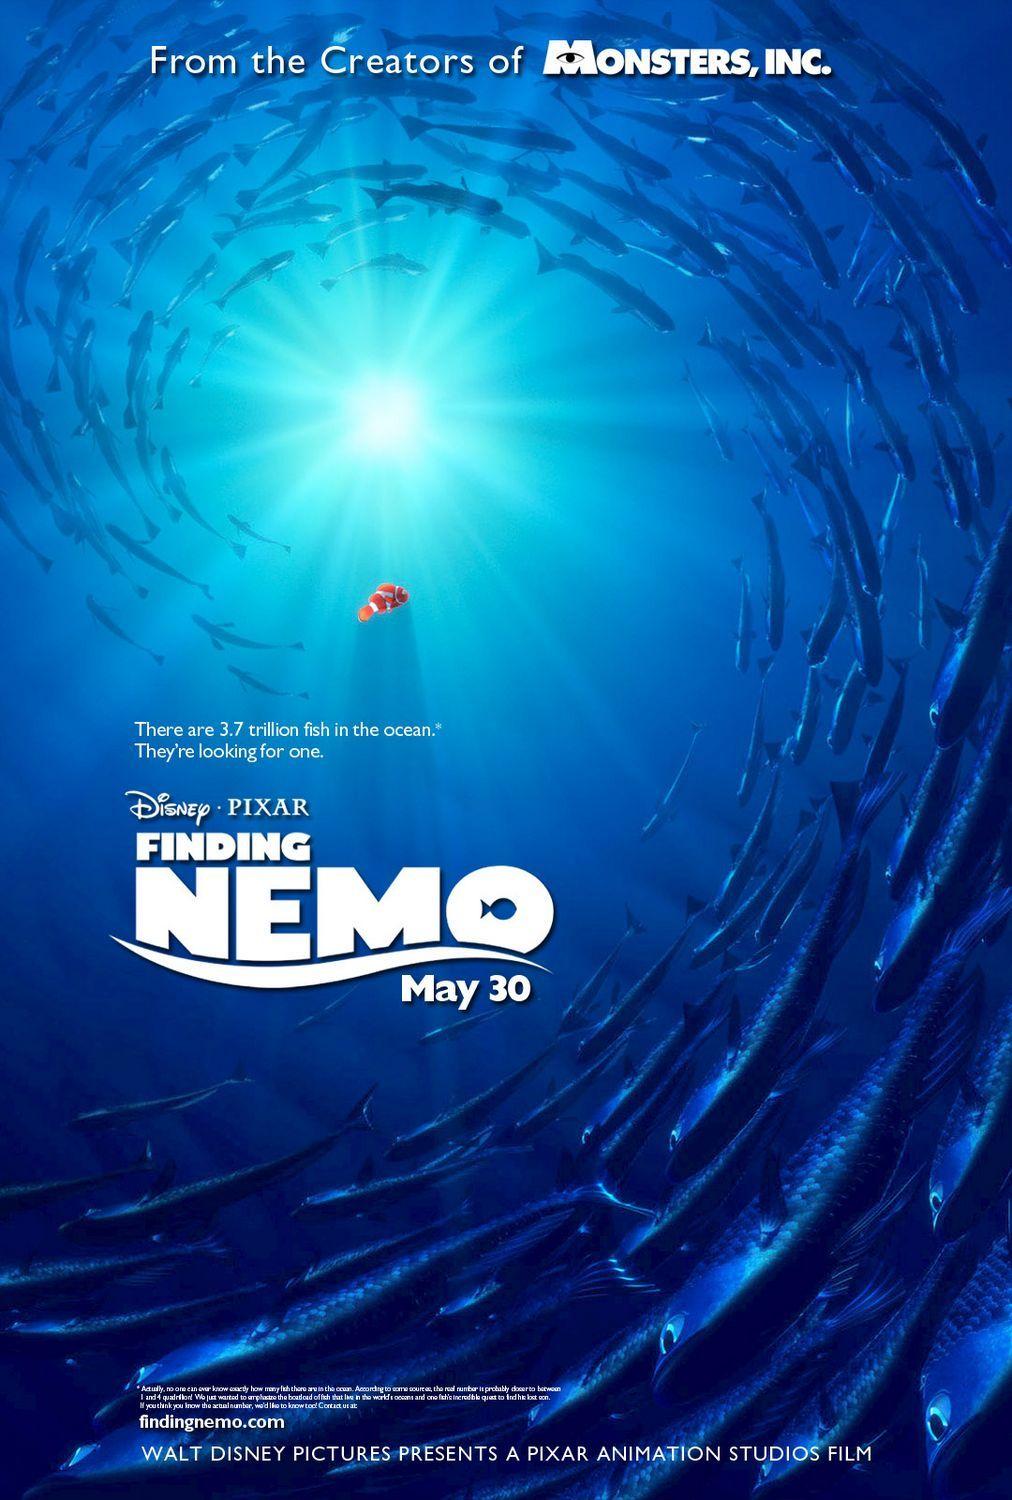 Disney Pixar Finding Nemo Logo - Finding Nemo logo and posters - Fonts In Use